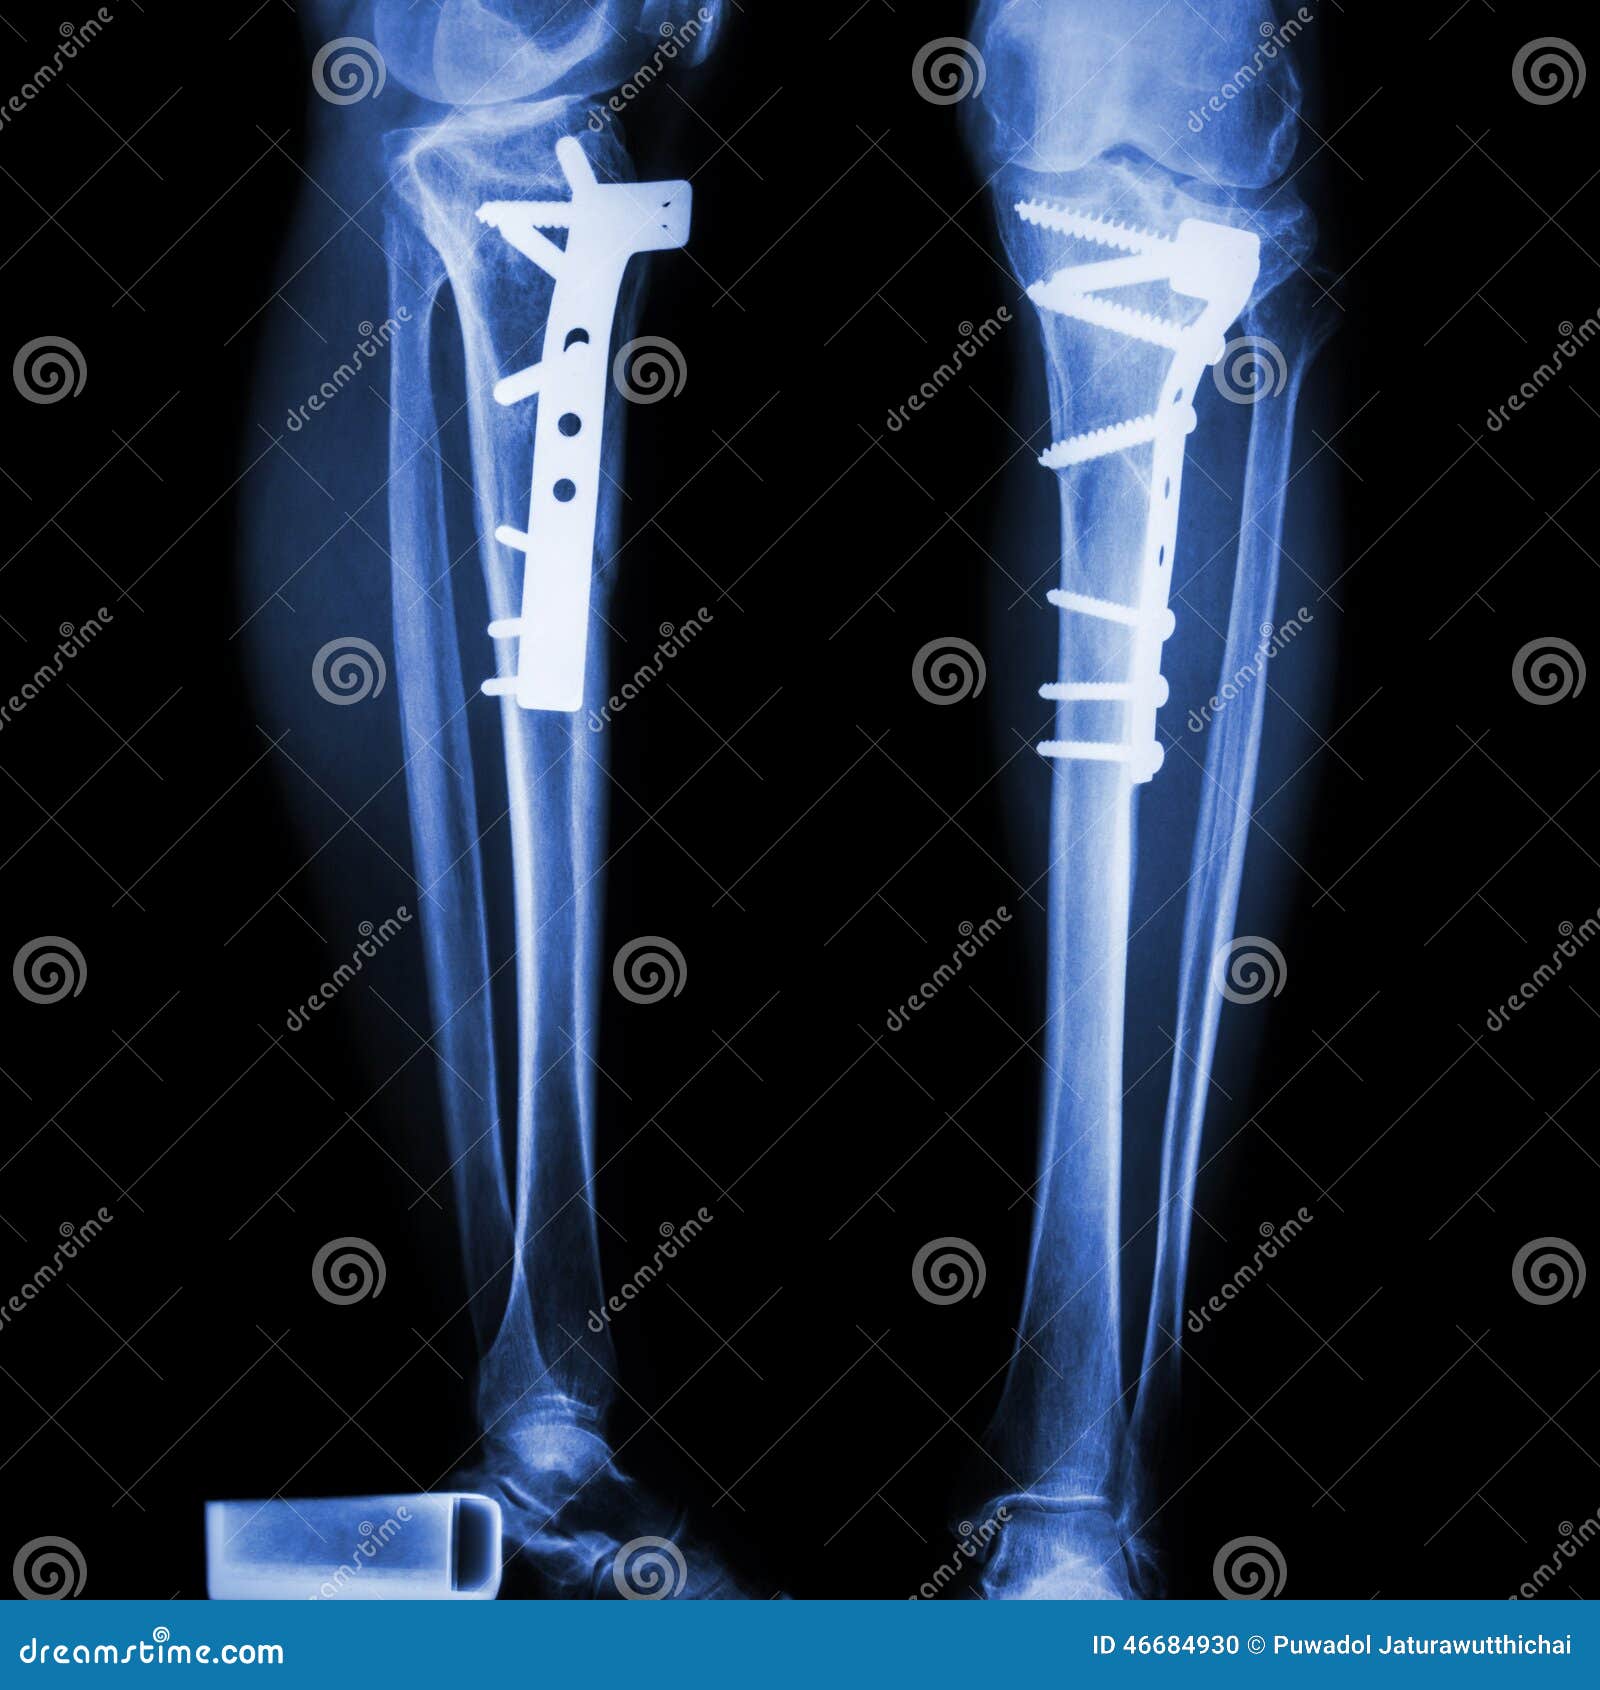 fracture tibia(leg bone). it was operated and internal fixed